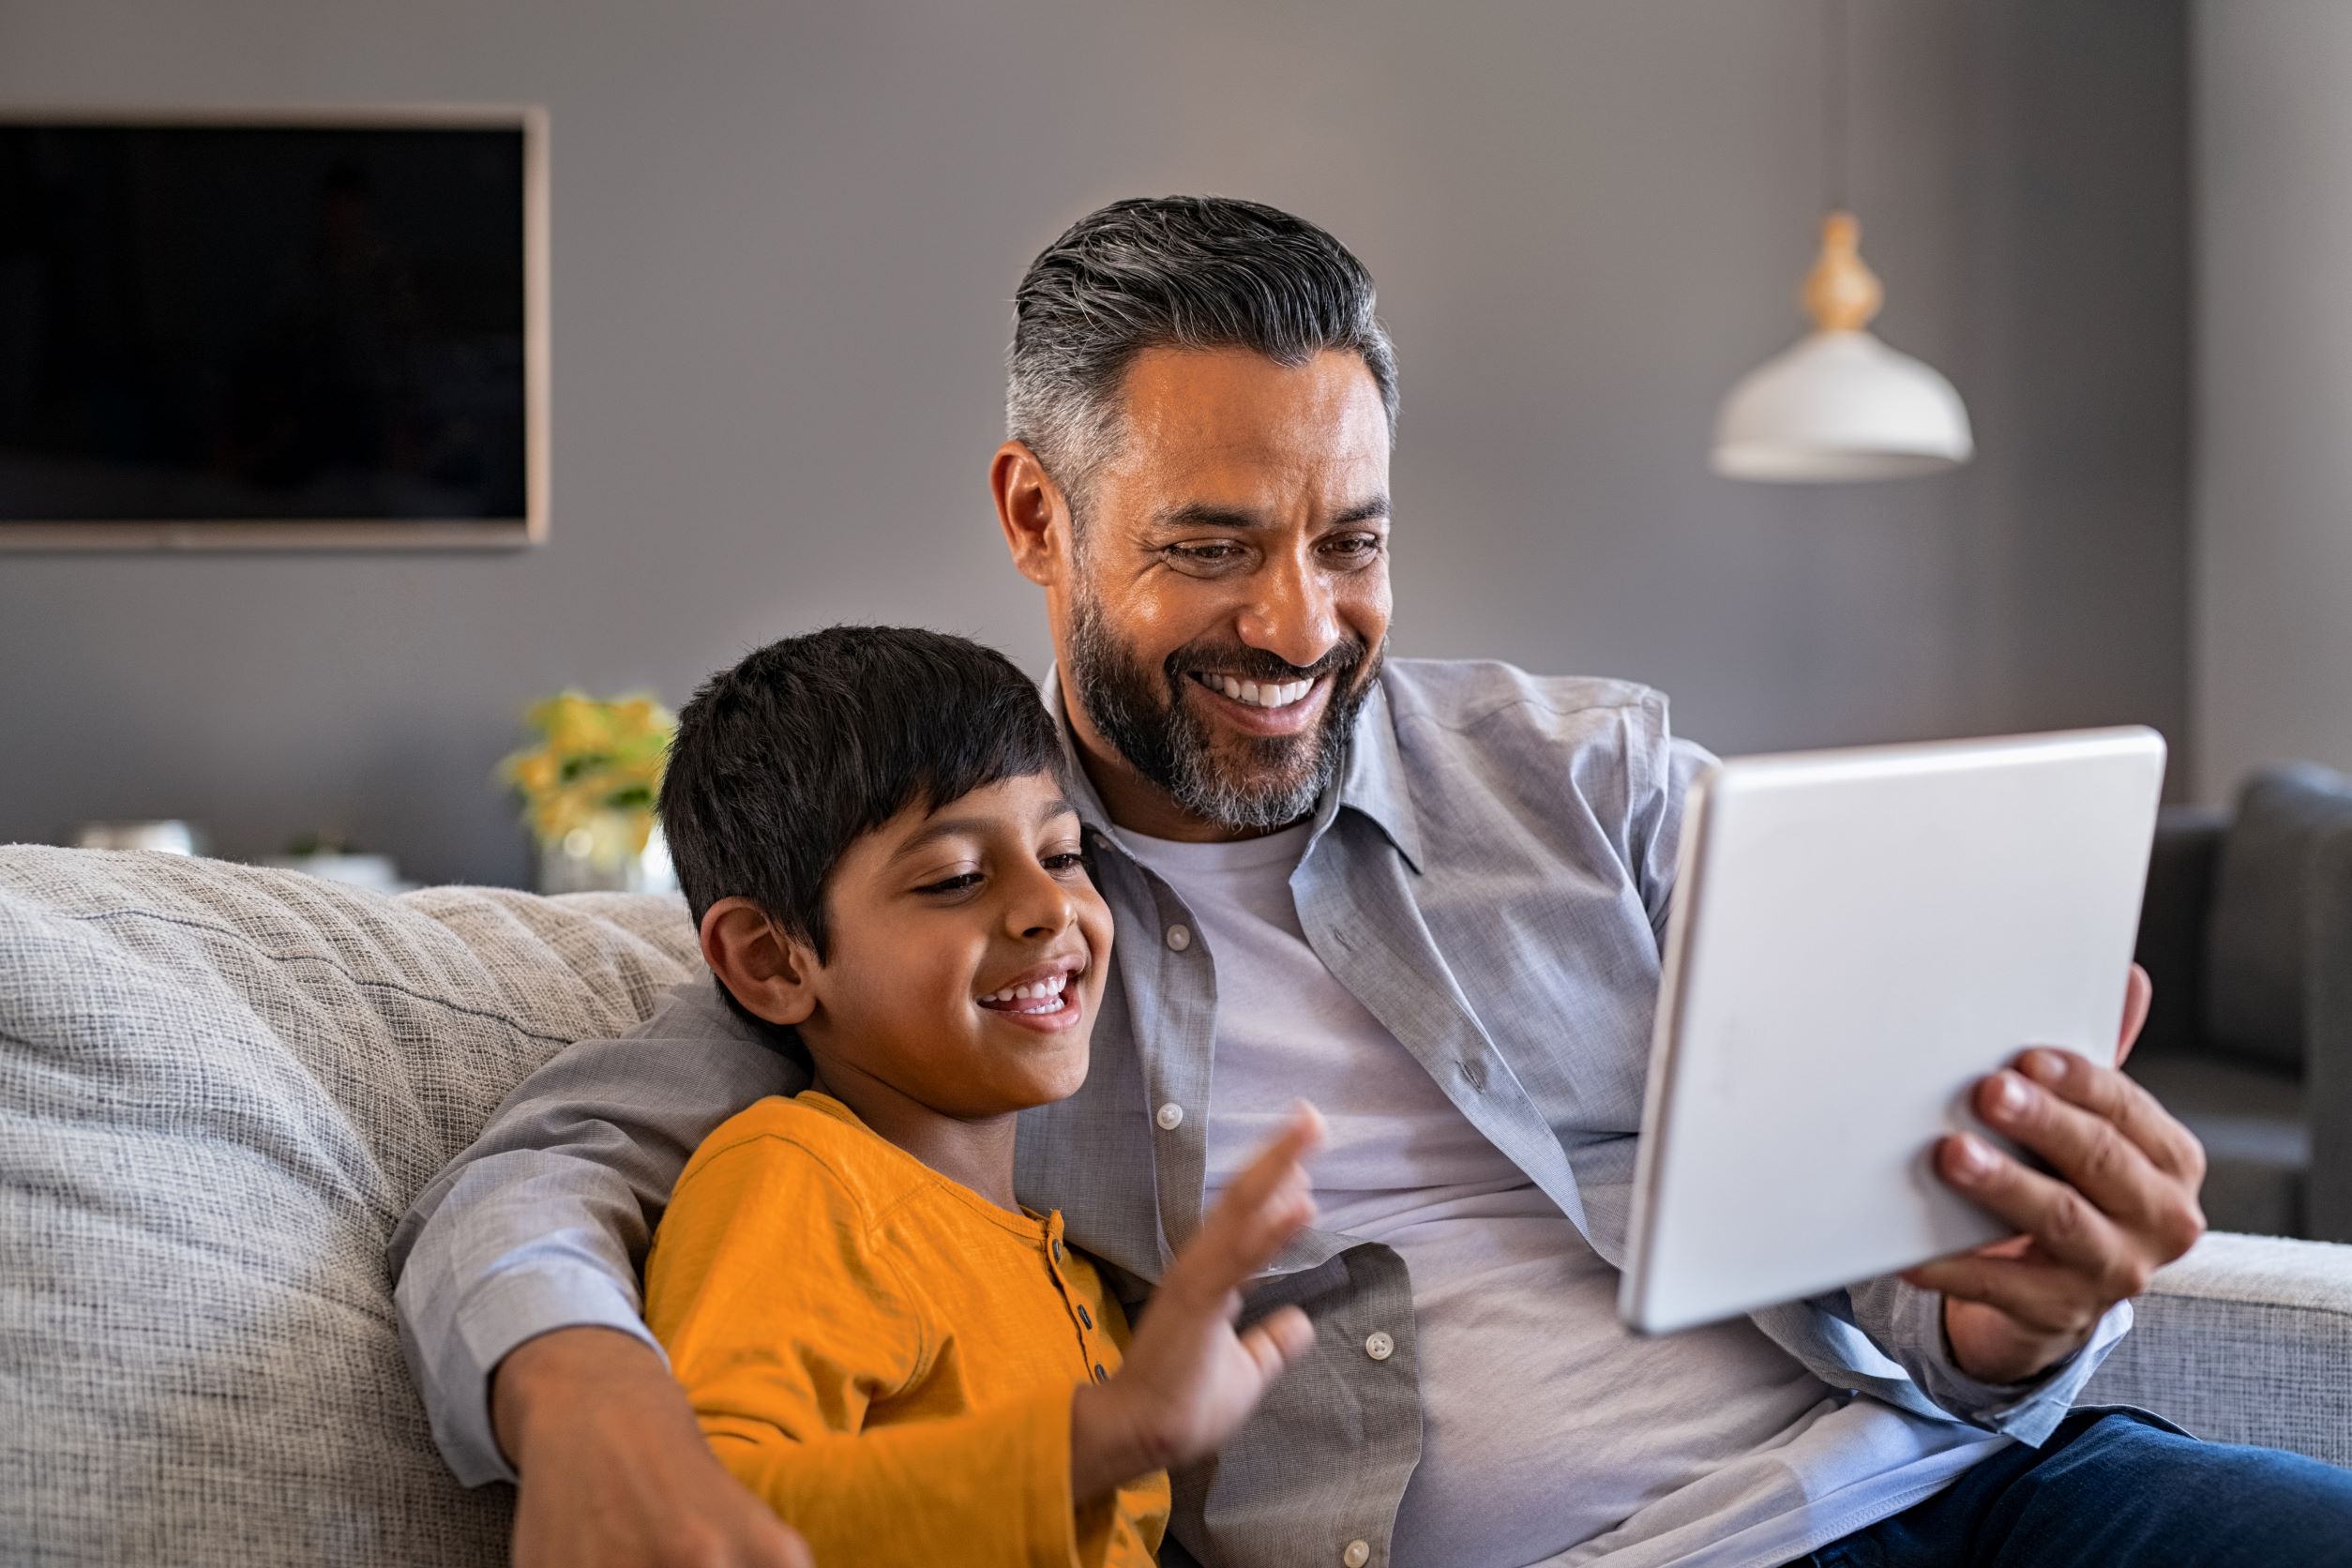 A father and son seating on their couch, the dad is holding up a tablet and they are both looking at the tablet screen